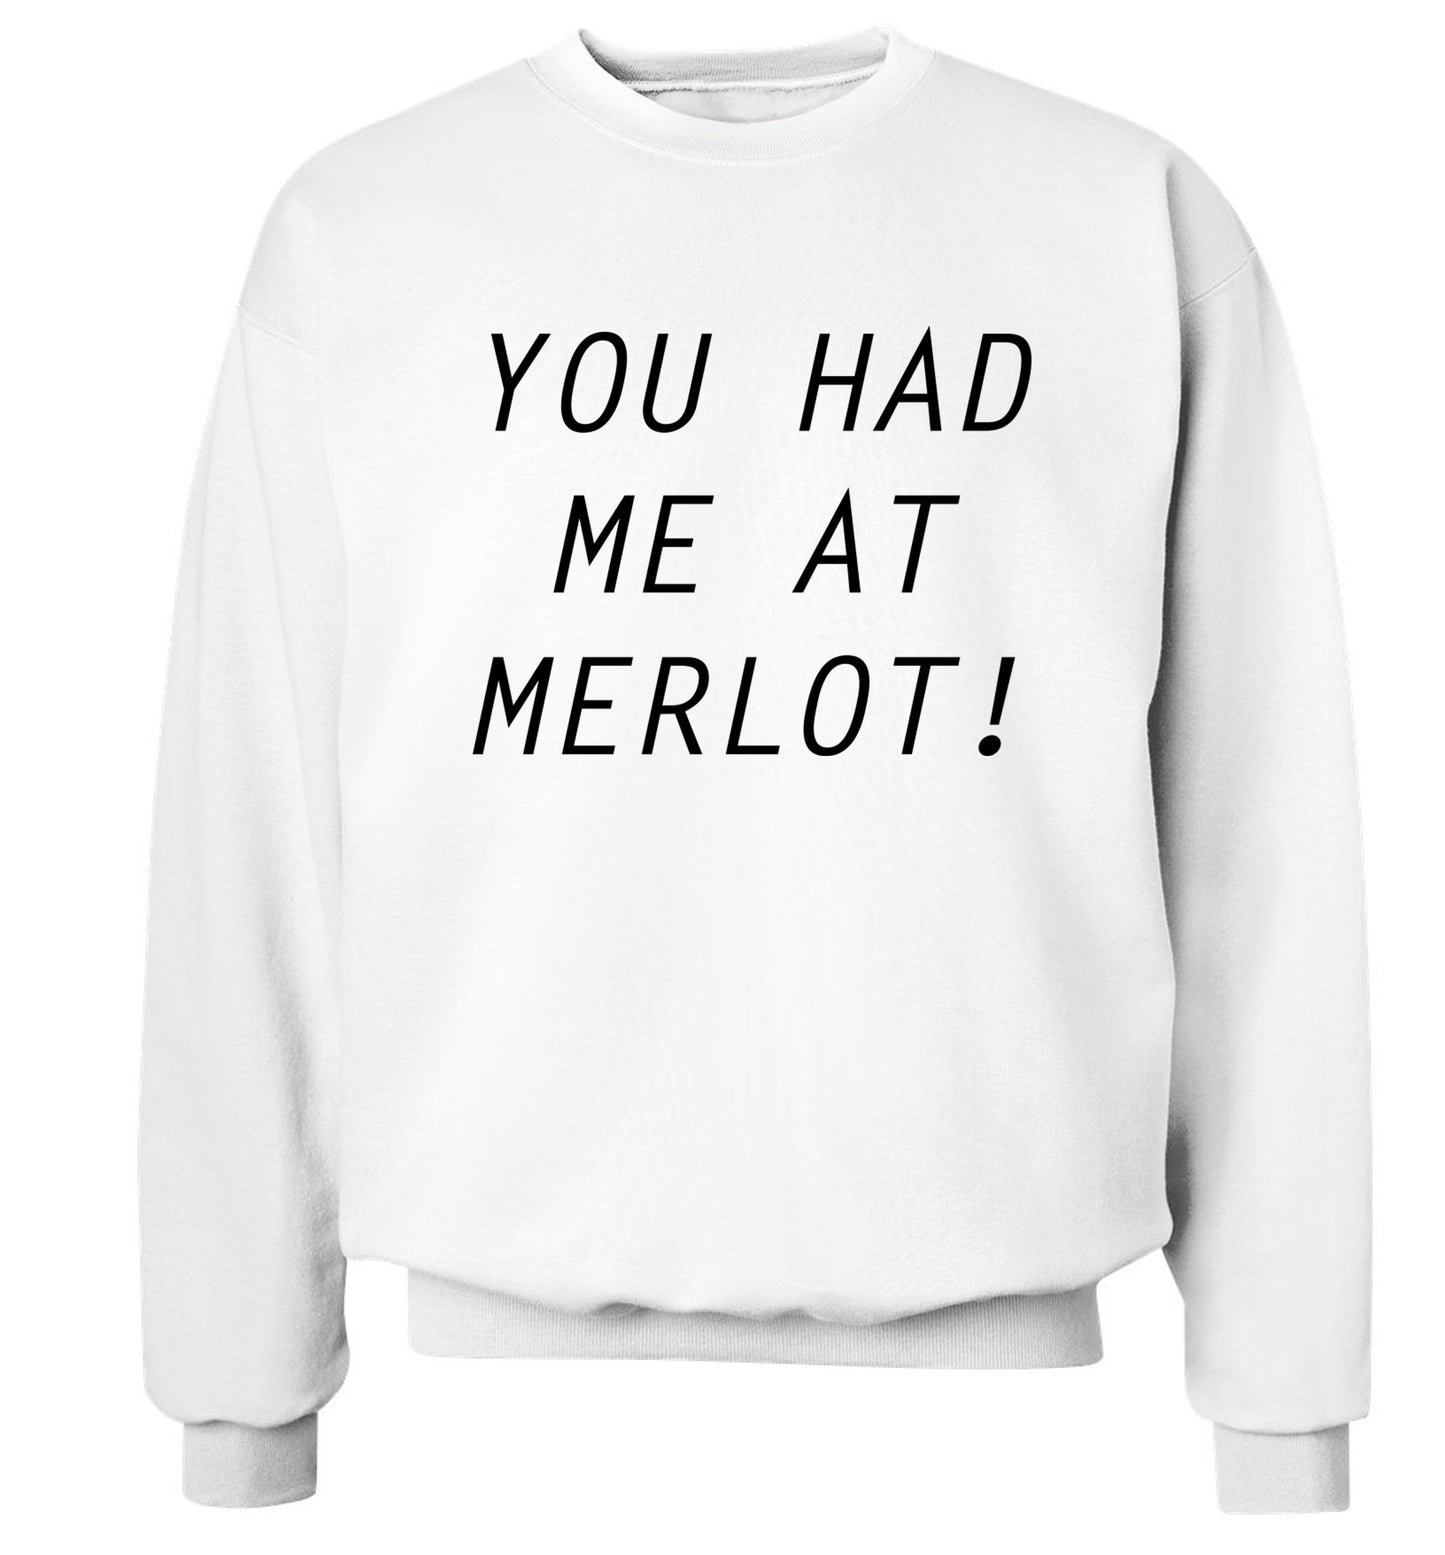 You had me at merlot Adult's unisex white Sweater 2XL